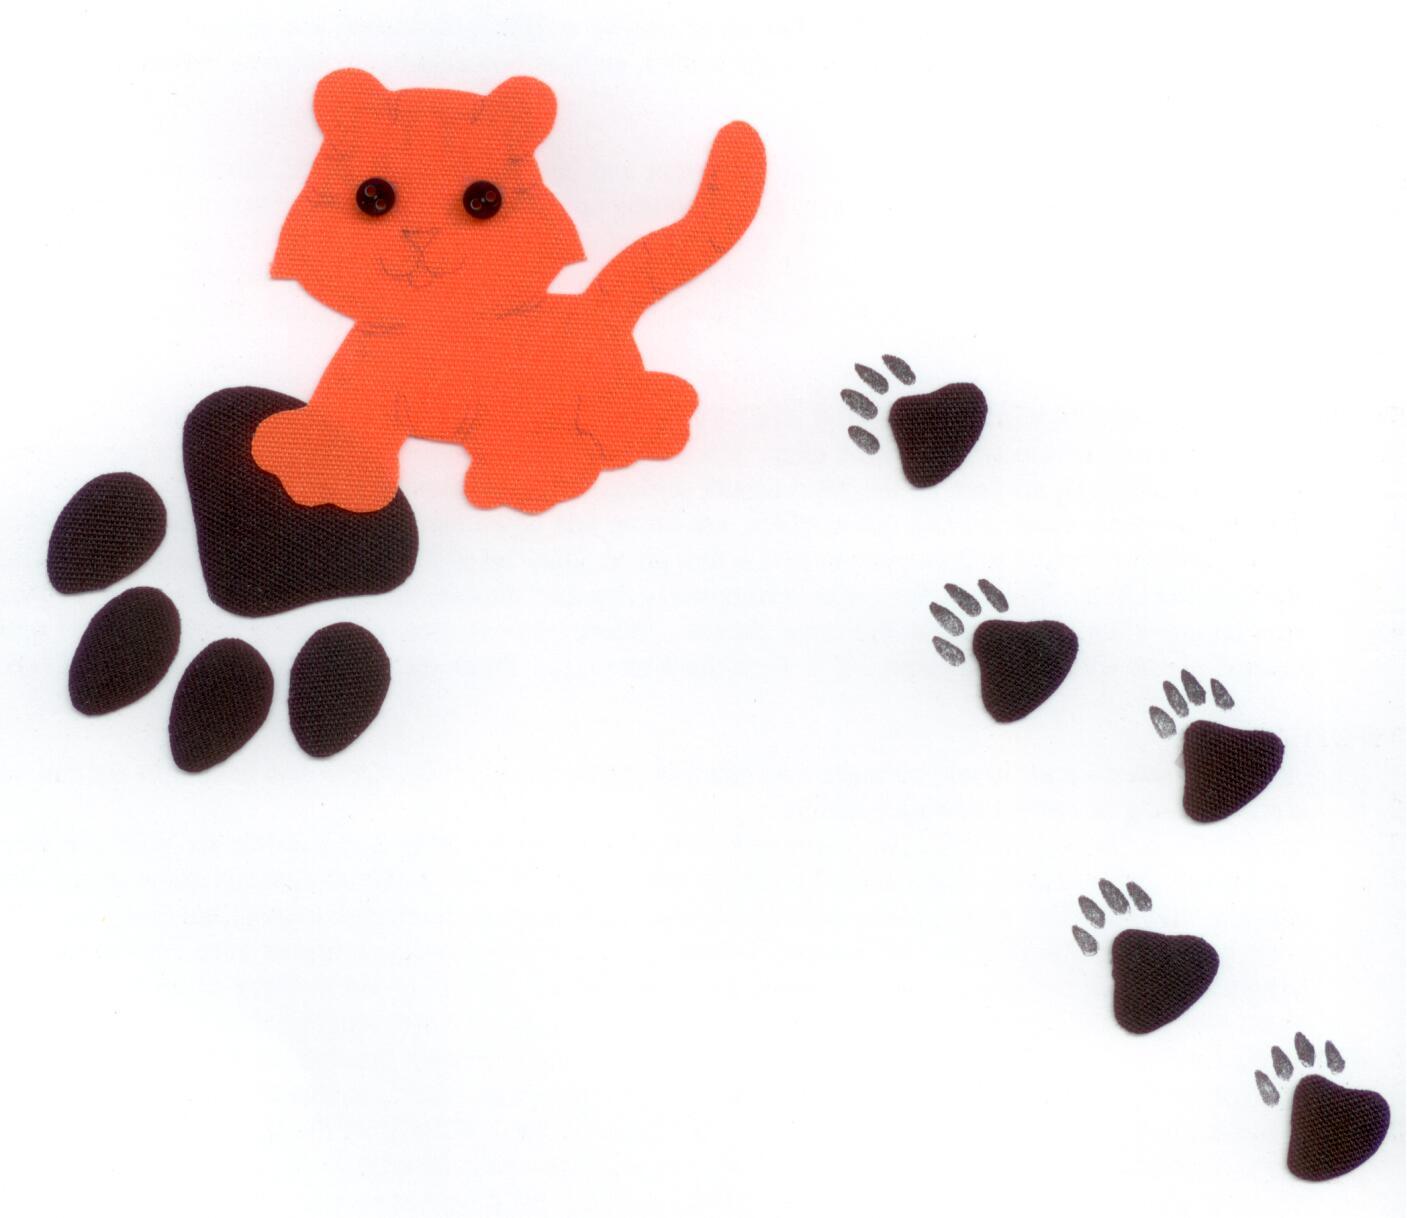 Baby Tiger With Paw Prints: Pictures Of Tiger Paw Prints ...